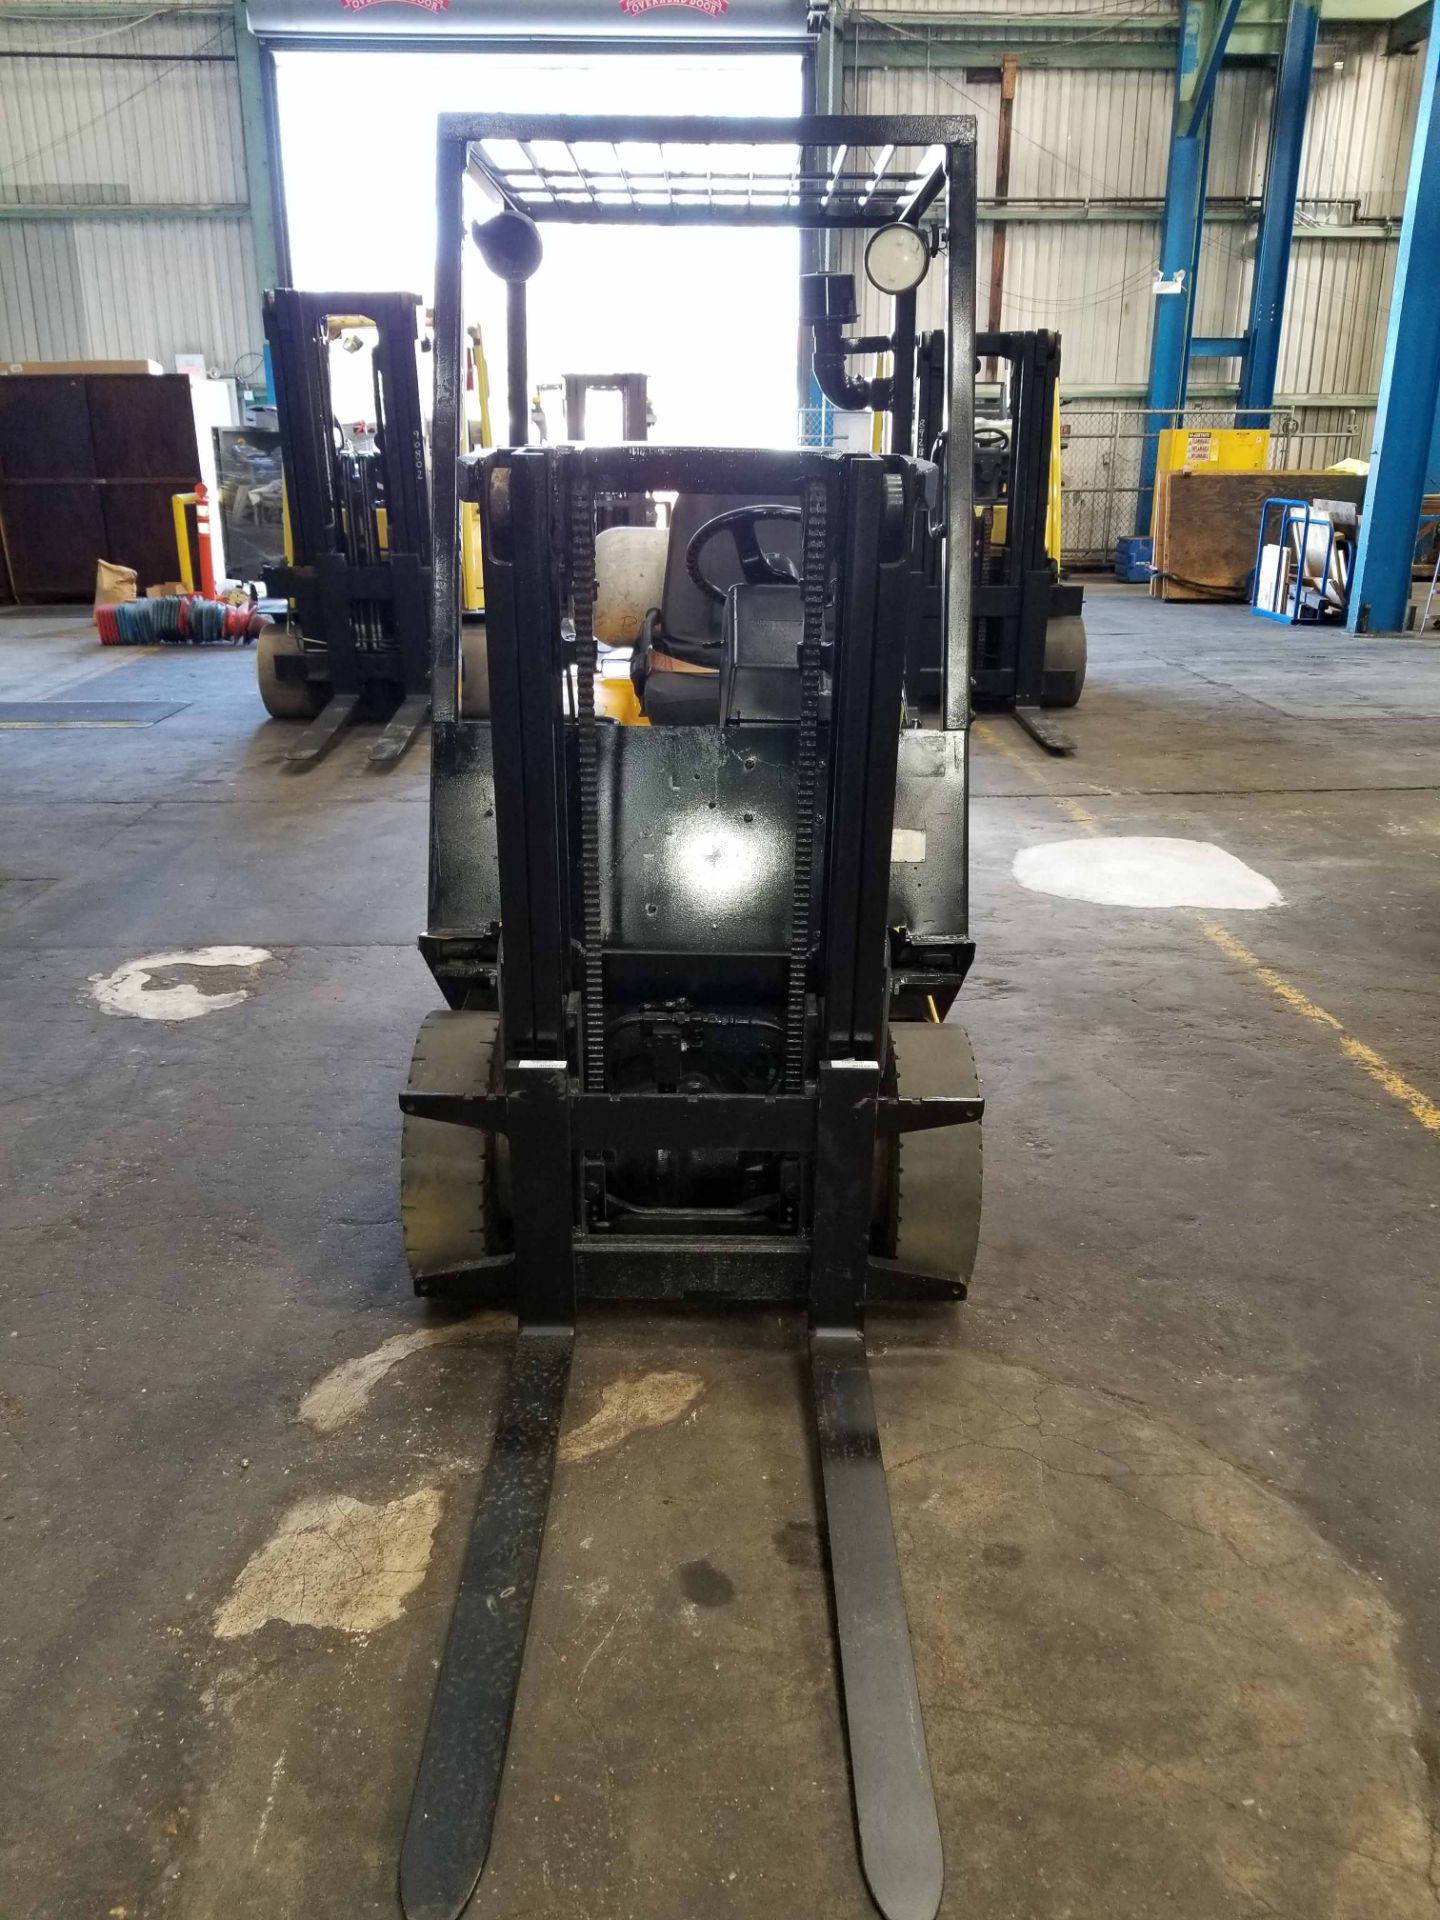 FORKLIFT, YALE 3,000 LB. CAP. MDL. GLP030, new 2004, LPG, 2-stage mast, 84” lift height, pneu. style - Image 2 of 4